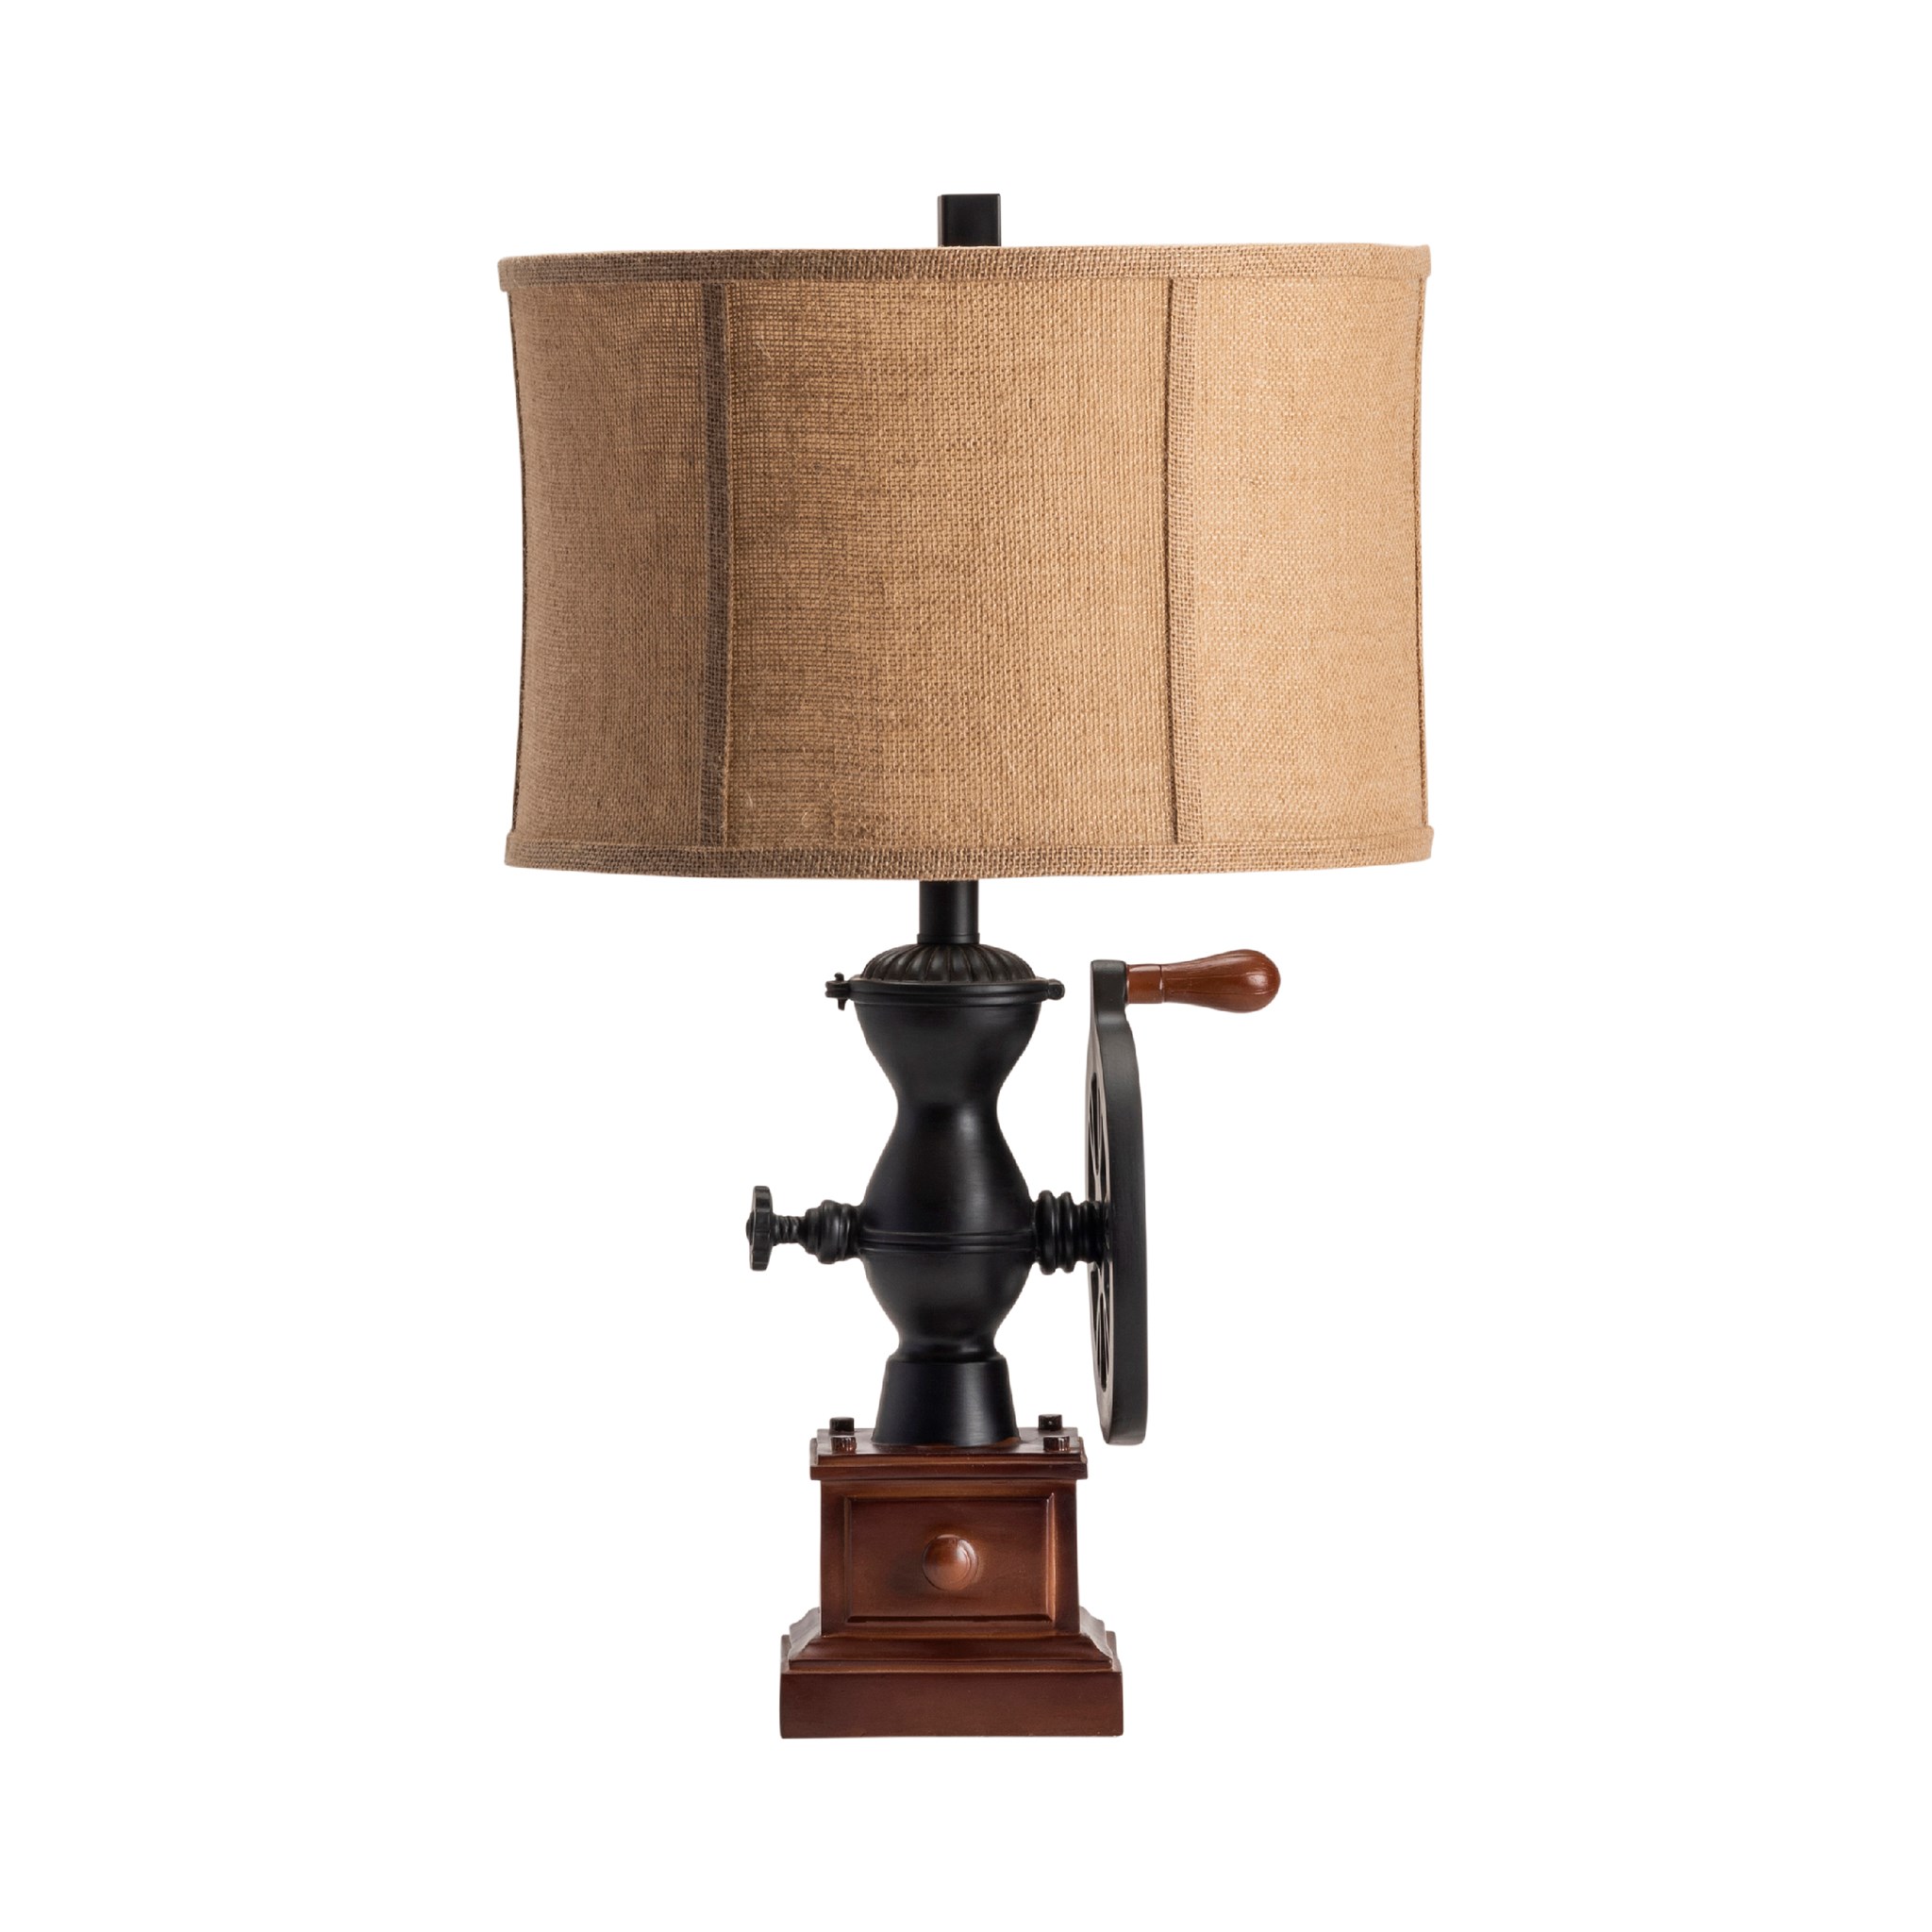 Crestview Collection Lighting Table, Crestview Collection Oil Lantern Table Lamp